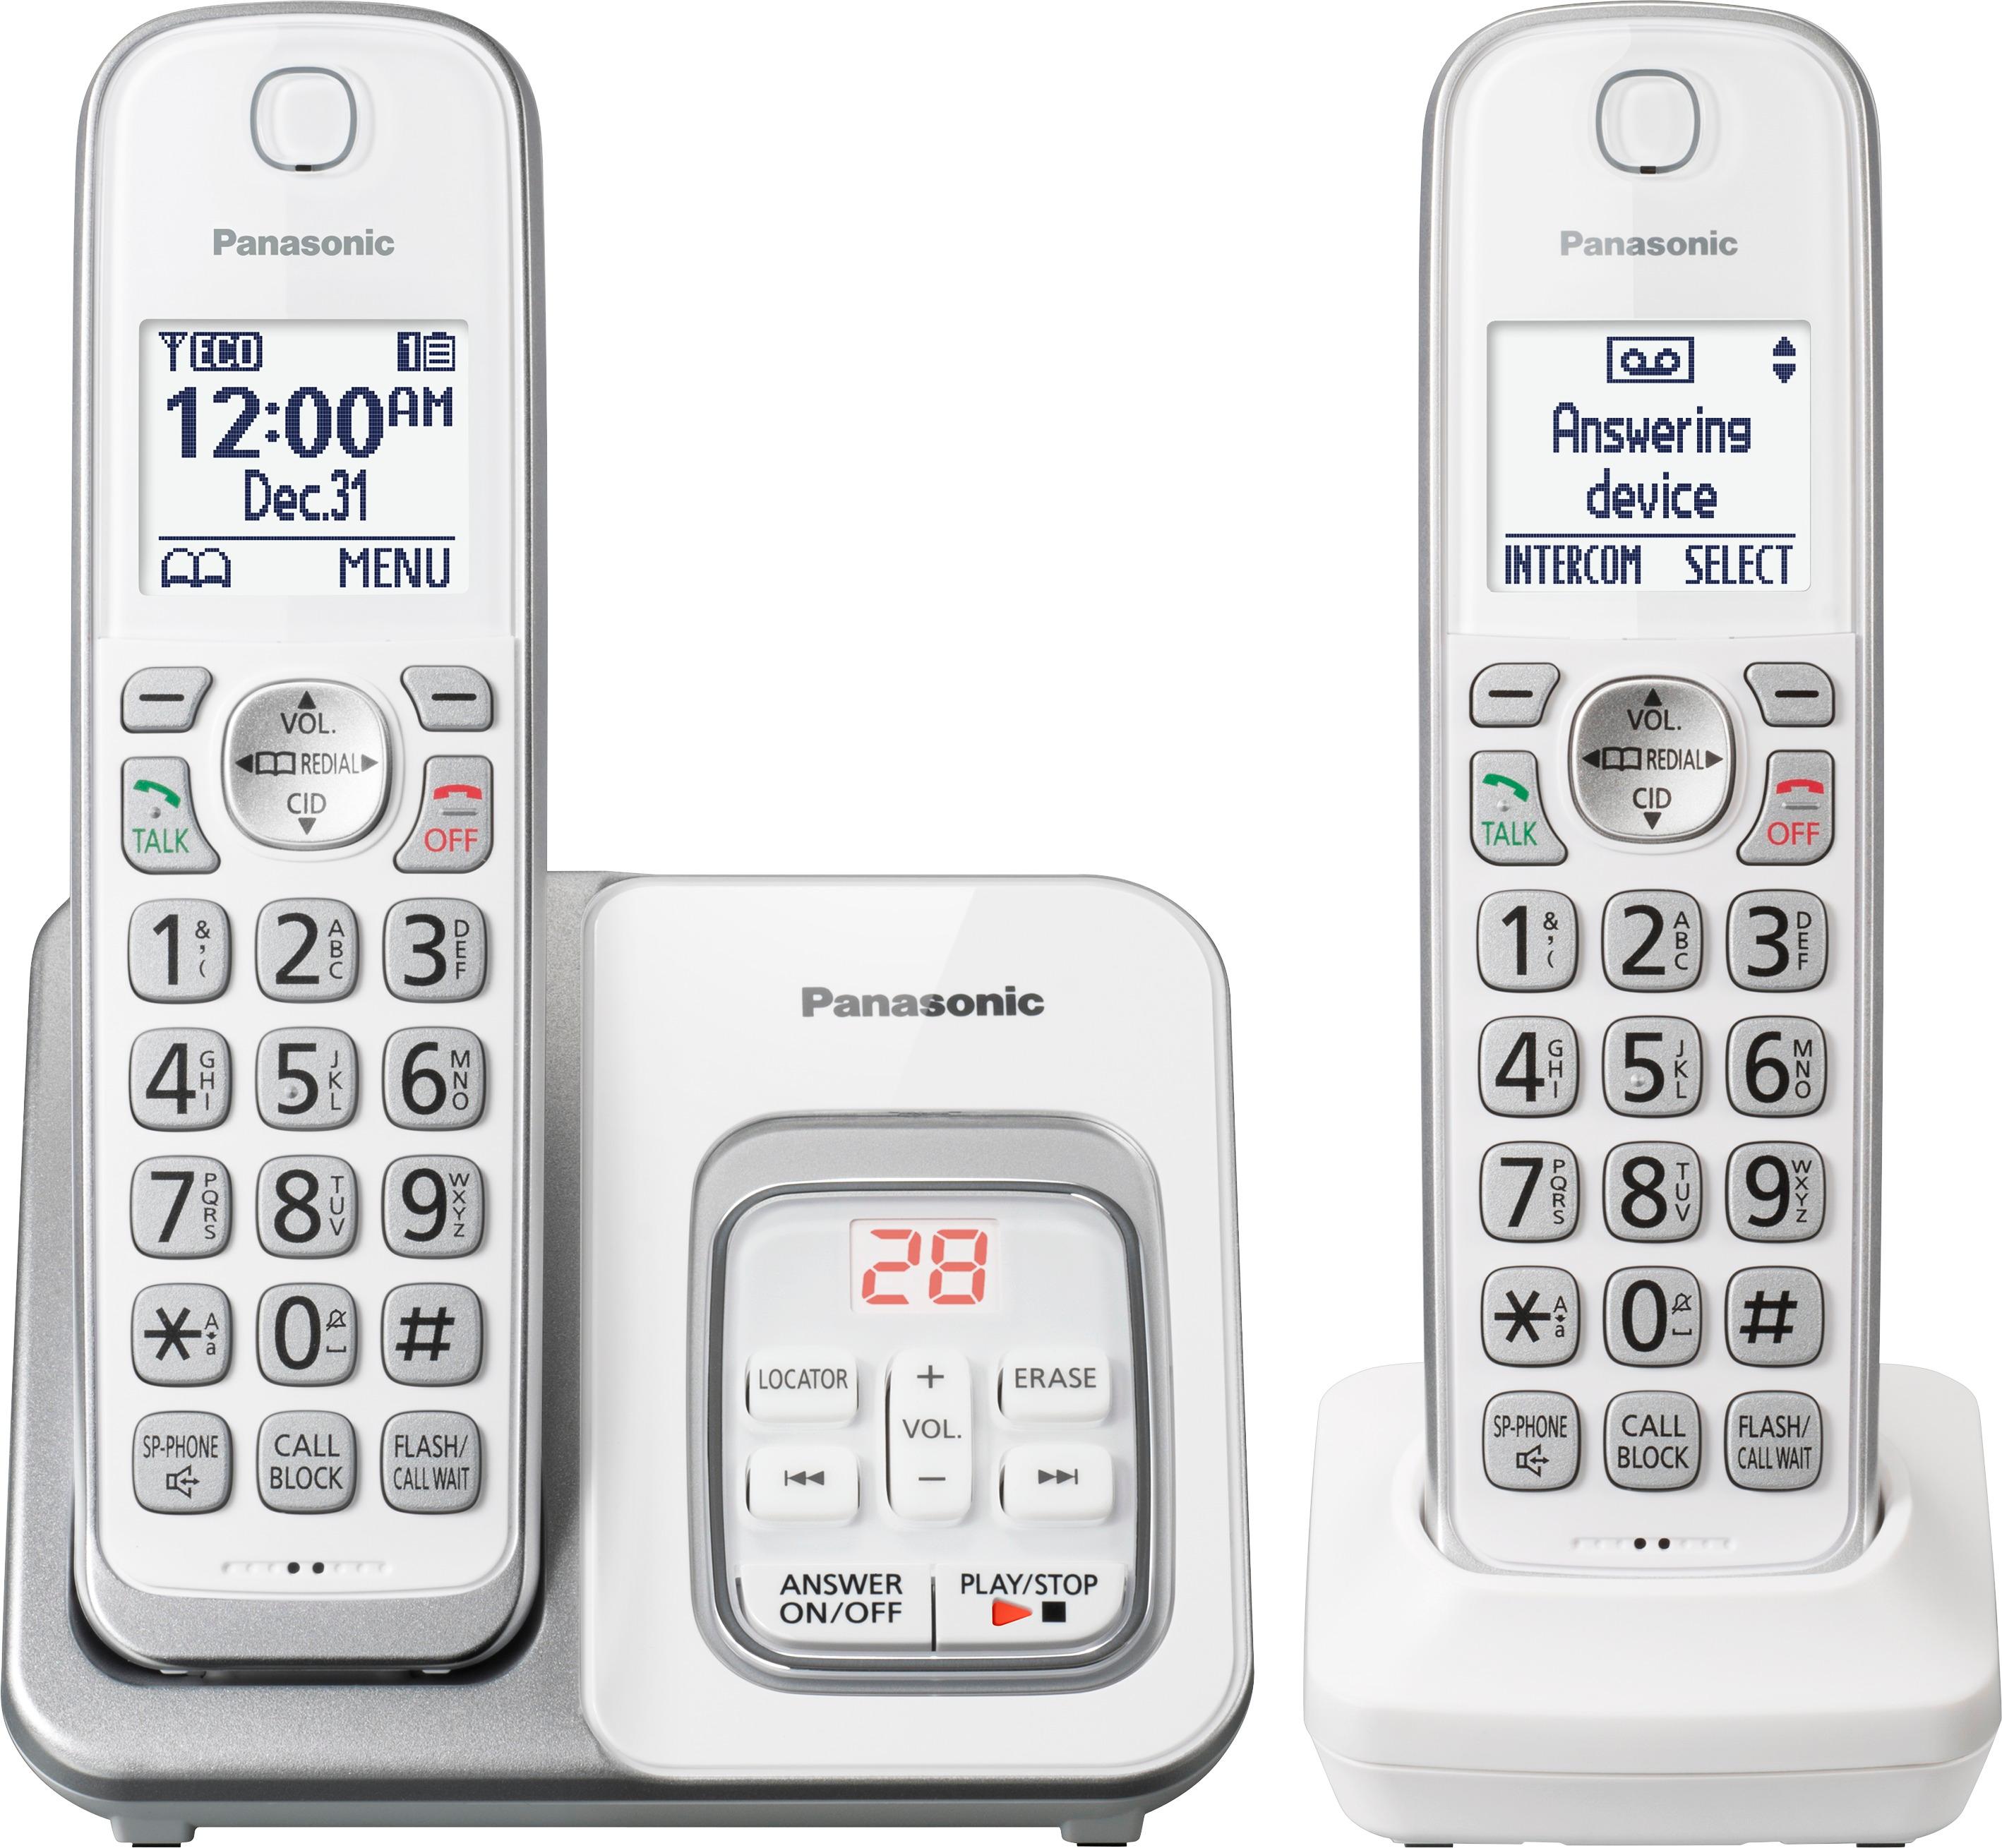 Panasonic Kx Tgd532w Dect 6 0 Expandable Cordless Phone System With Digital Answering System White Kx Tgd532w Best Buy